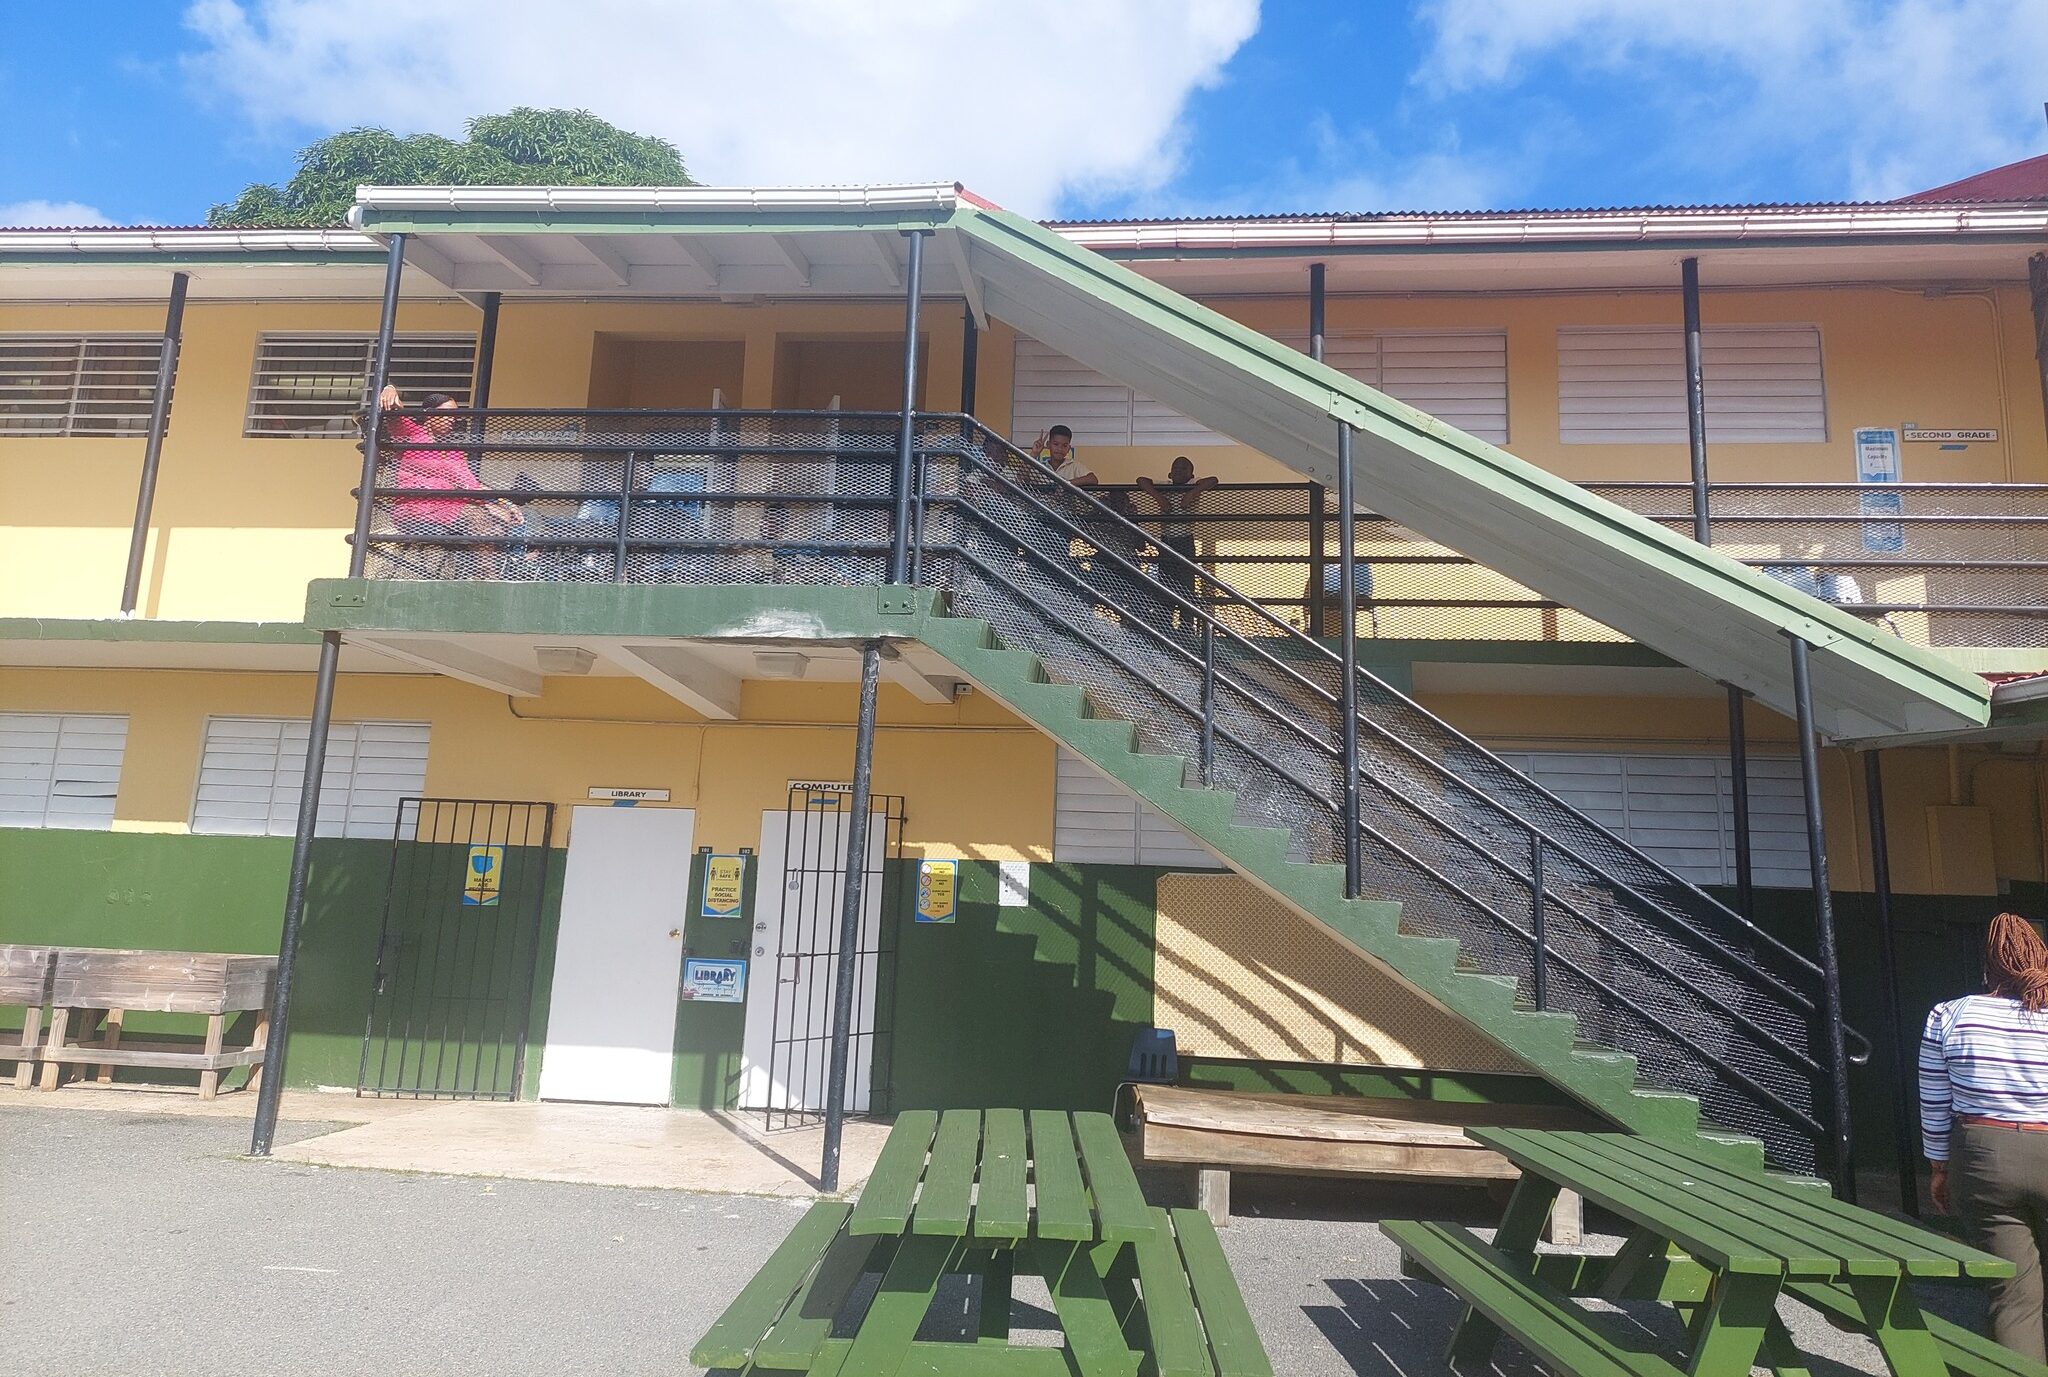 The Federal Emergency Management Agency has awarded the V.I. Education Department a $75 million grant for the replacement of the Jane E. Tuitt Elementary School on St. Thomas, which was badly damaged in Hurricane Maria, Delegate to Congress Stacey Plaskett announced Thursday. (Photo by V.I. Education Department)